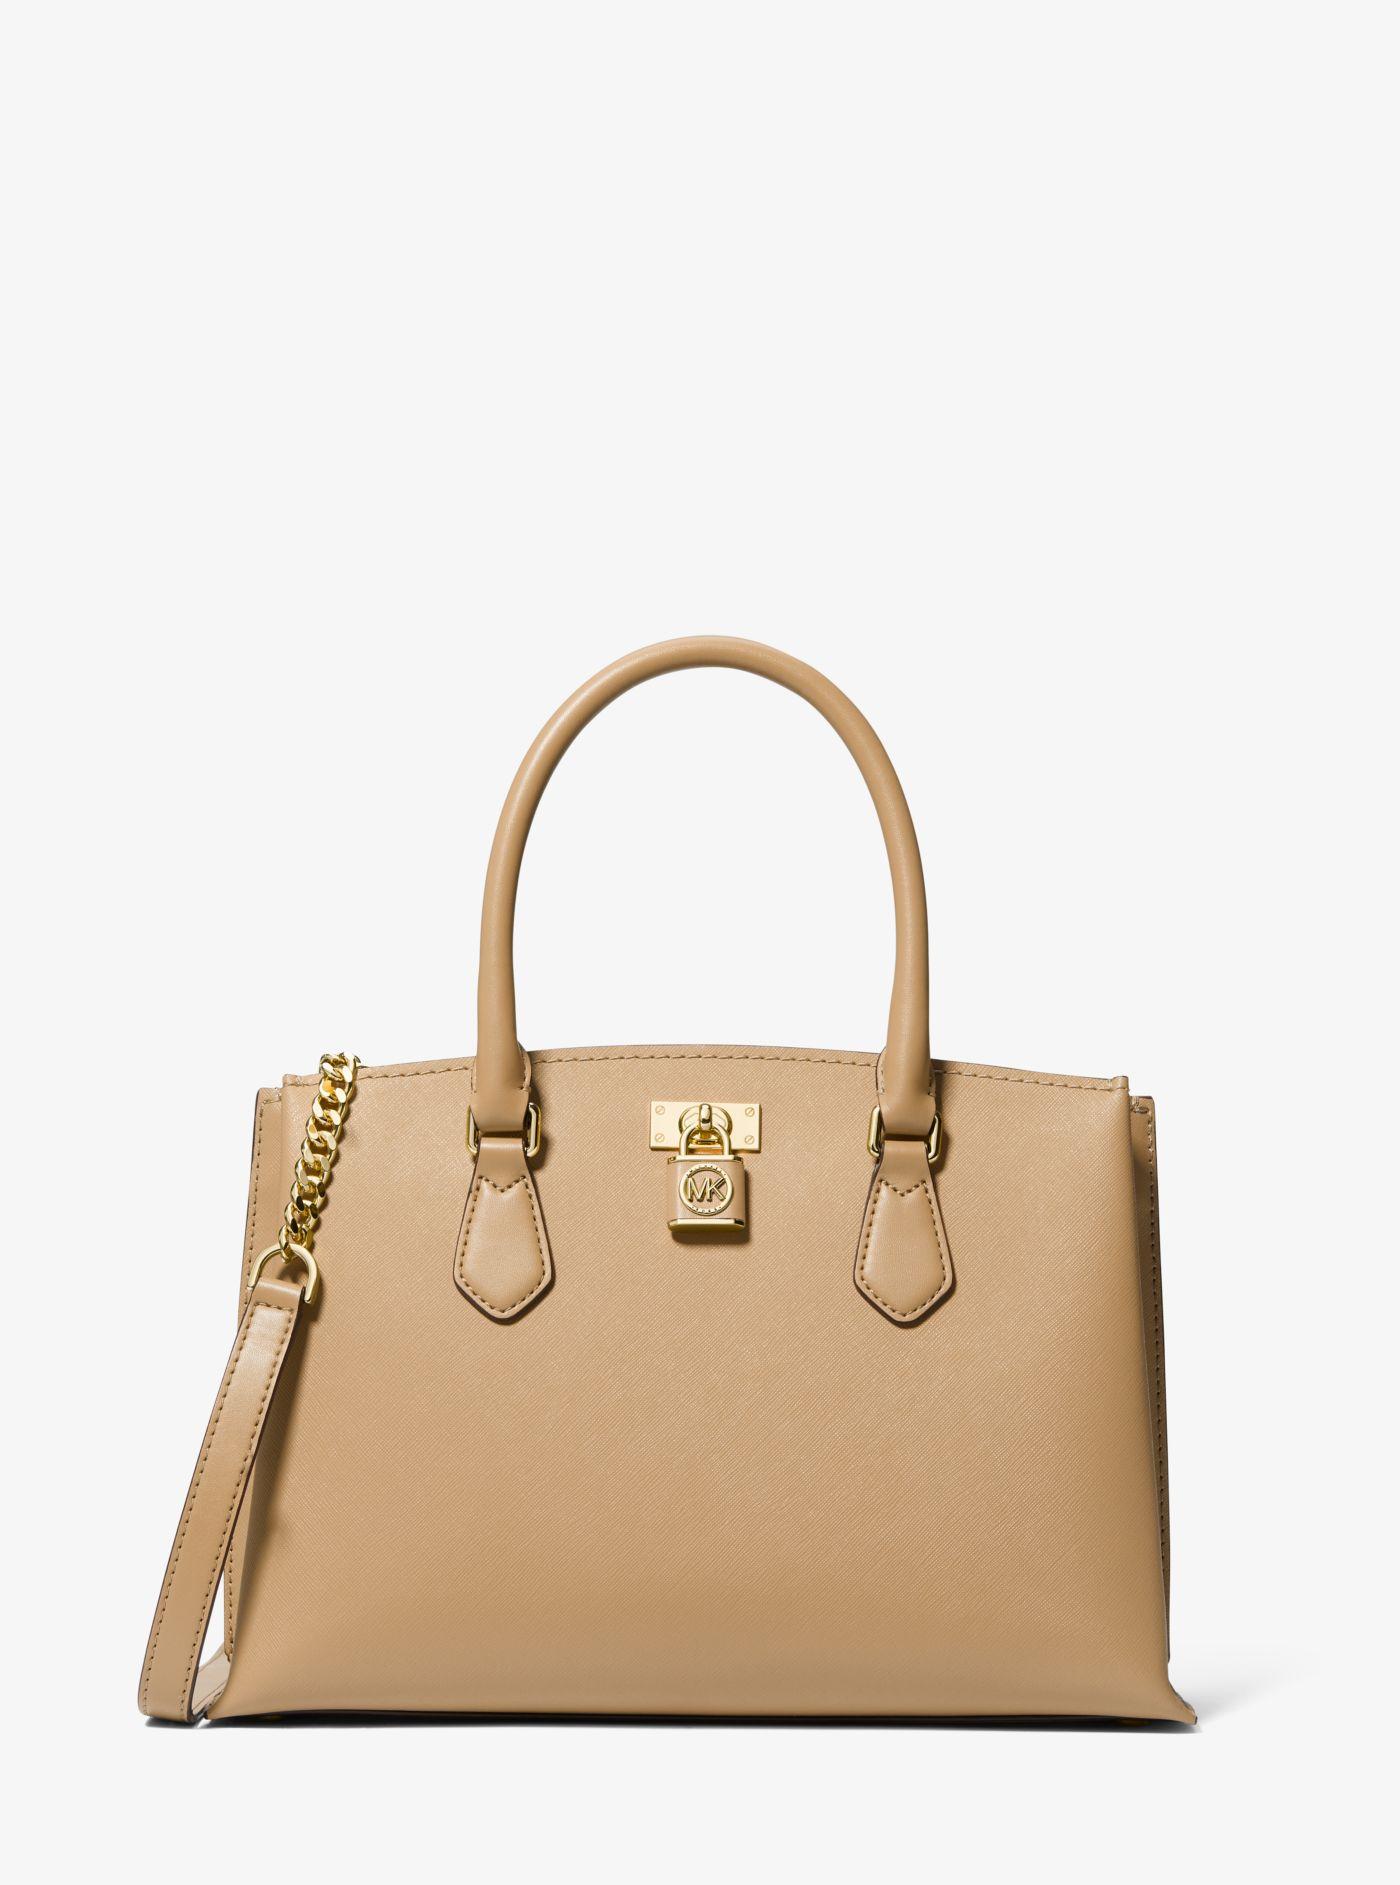 Michael Kors Ruby Medium Saffiano Leather Satchel in Natural | Lyst